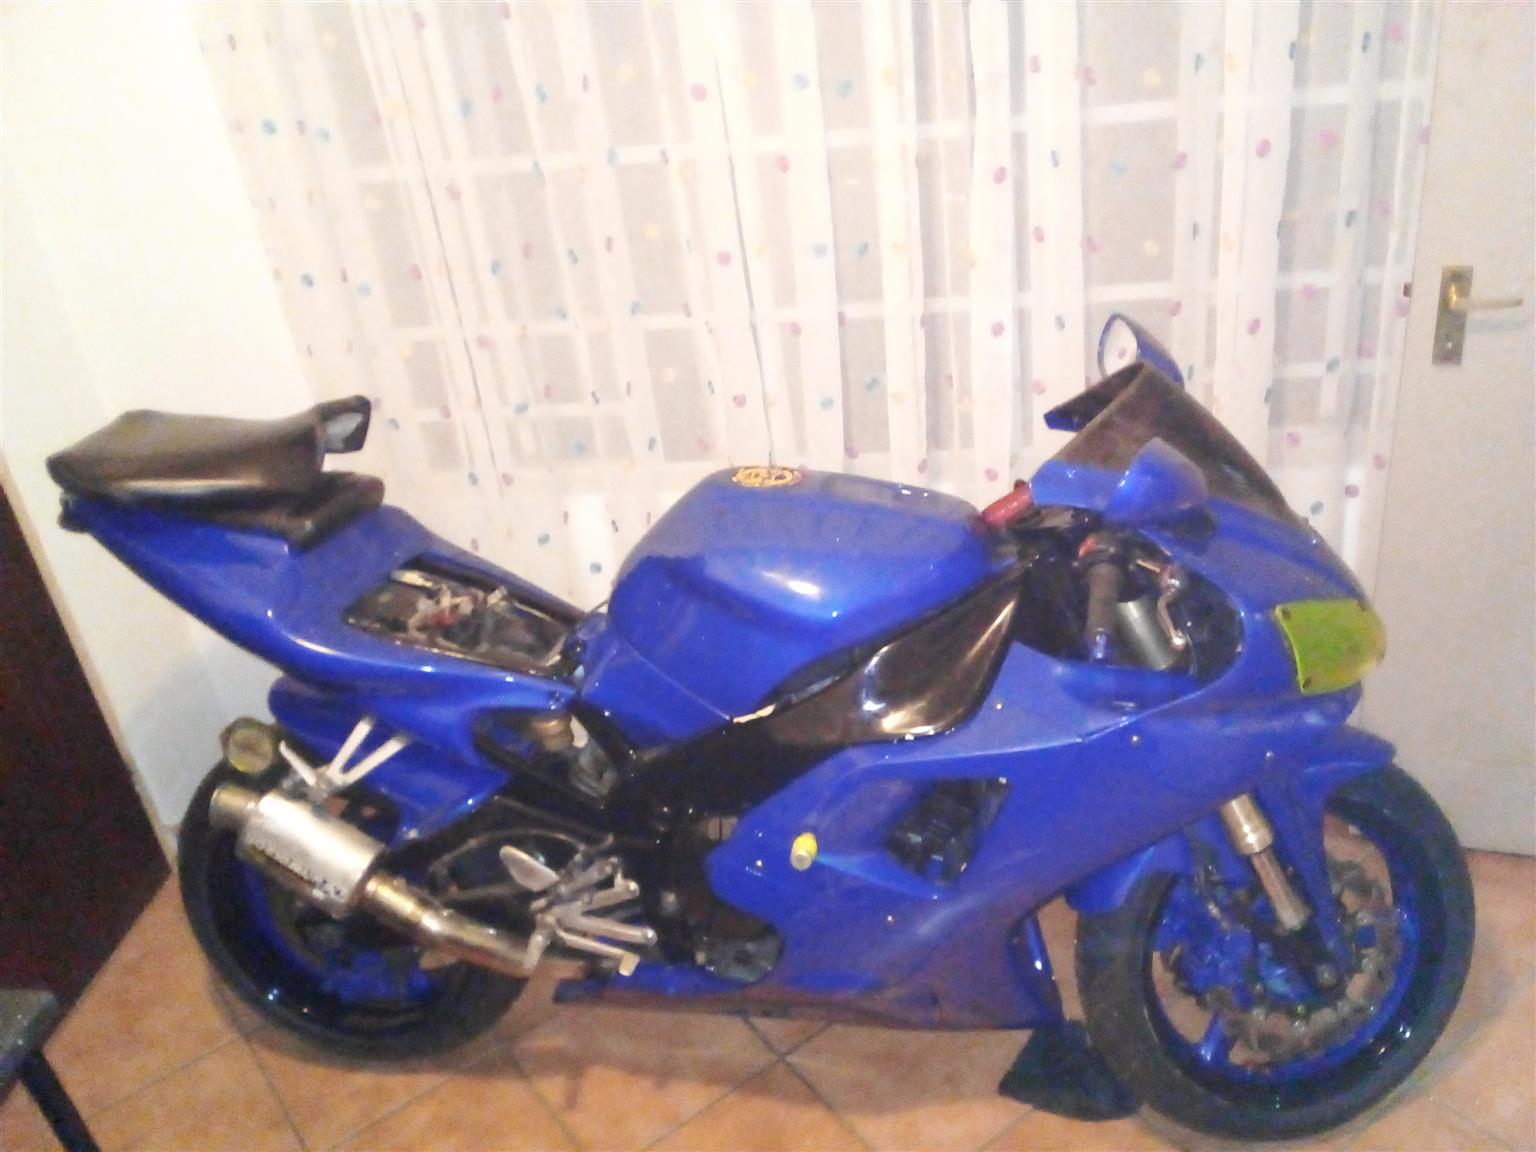 Yamaha R1 for sale its a 2000 model 